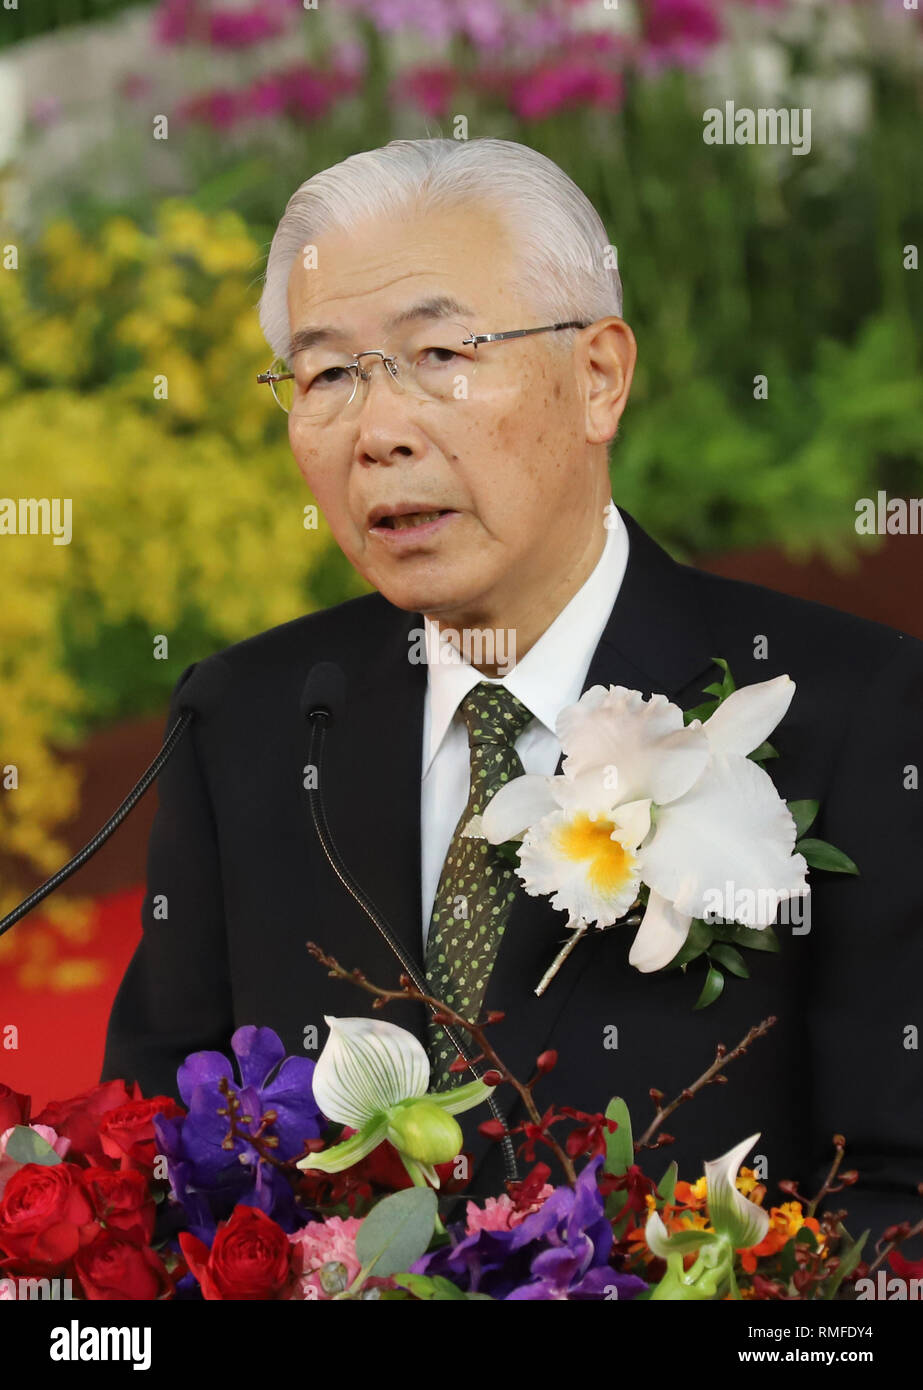 Tokyo, Japan. 15th Feb, 2019. Japan's largest newspaper Yomiuri Shimbun Holdings chaiman Koijiro Shiraishi delivers a speech at the opening ceremony for 'JGP International Orchid and Flower Show' at the Tokyo Dome stadium in Tokyo on Friday, February 15, 2019. The annual flower festival with 3,000 types, 100,000 plants orchids will be held from February 15 through 22. Credit: Yoshio Tsunoda/AFLO/Alamy Live News Stock Photo